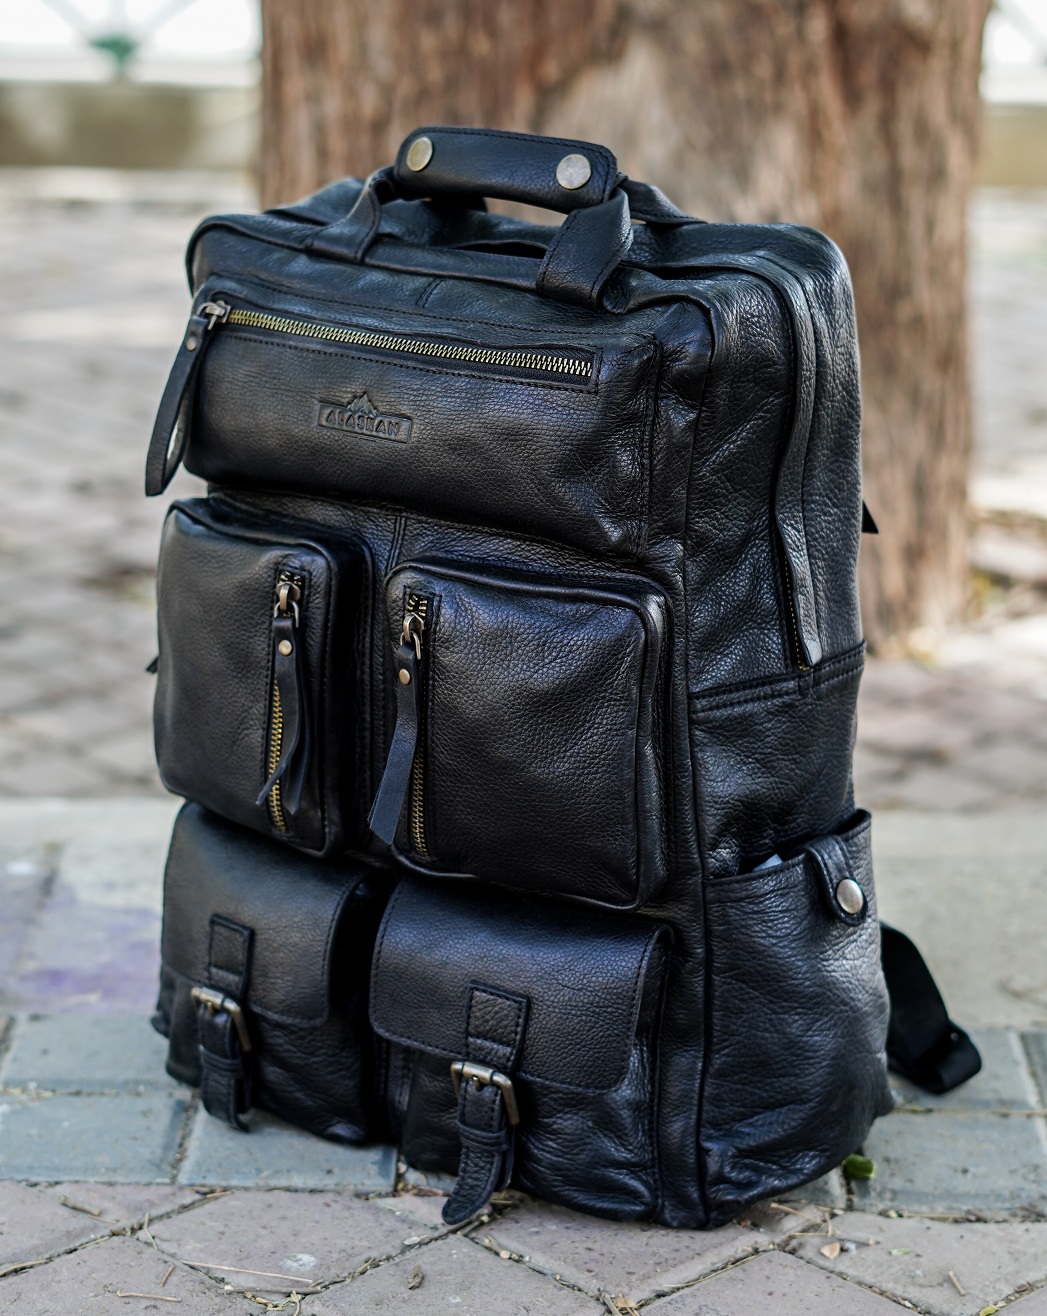 Anderson adventure leather backpack